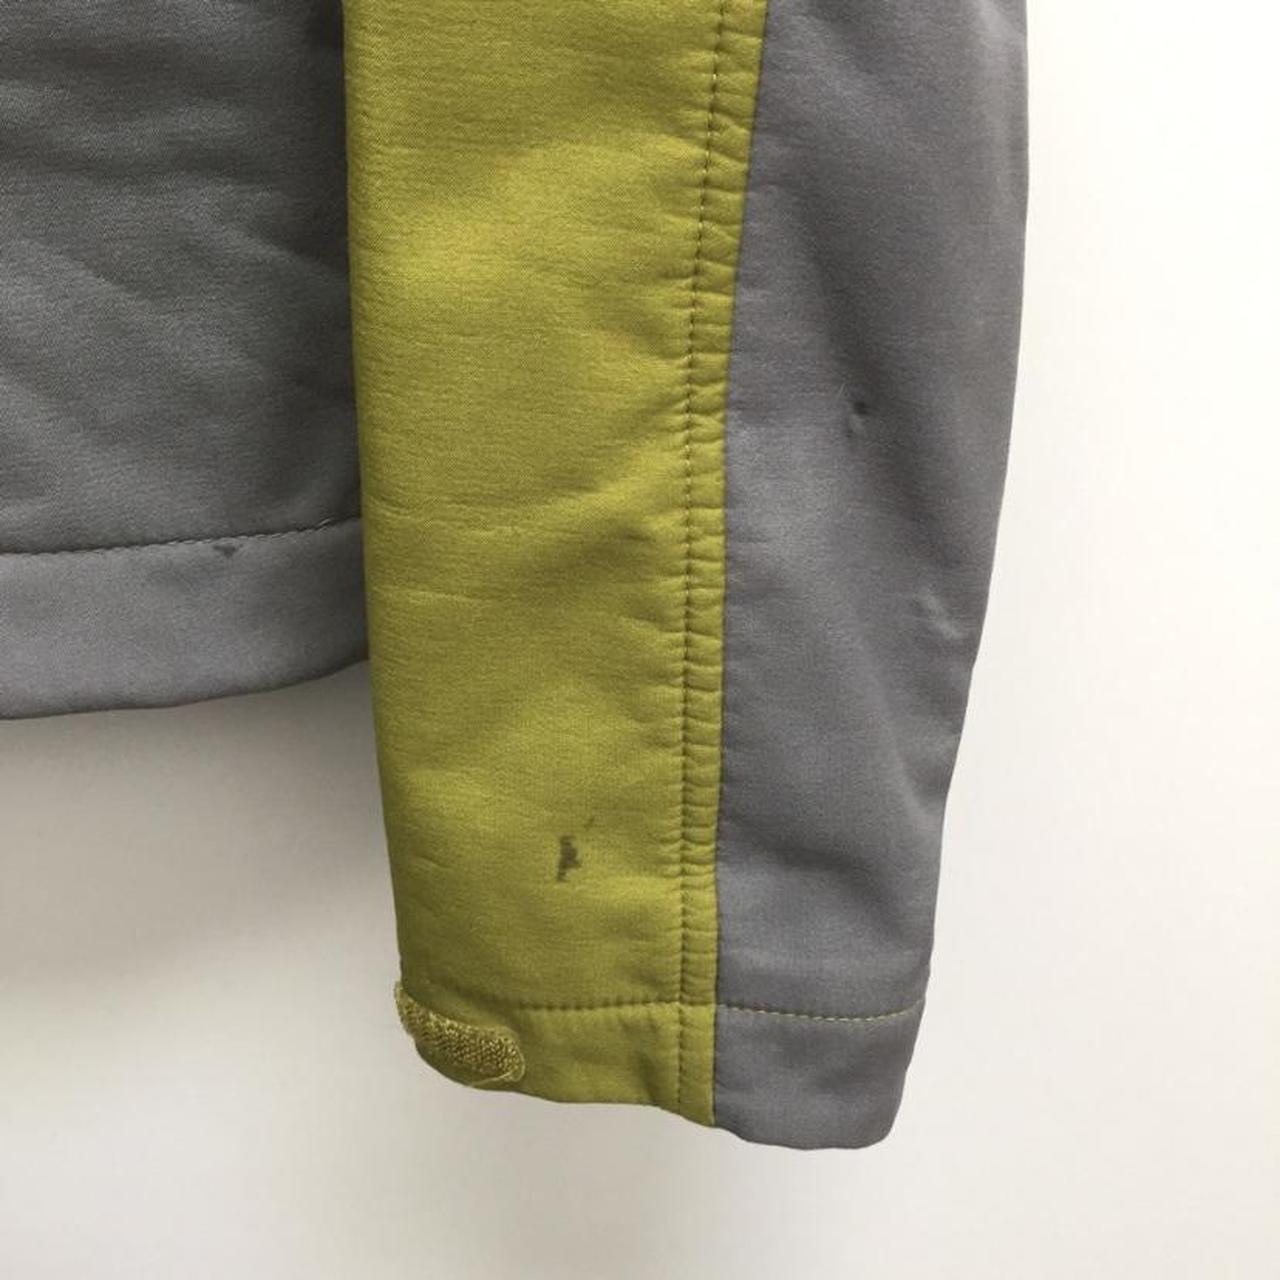 The North Face Women's Green and Grey Jacket (3)